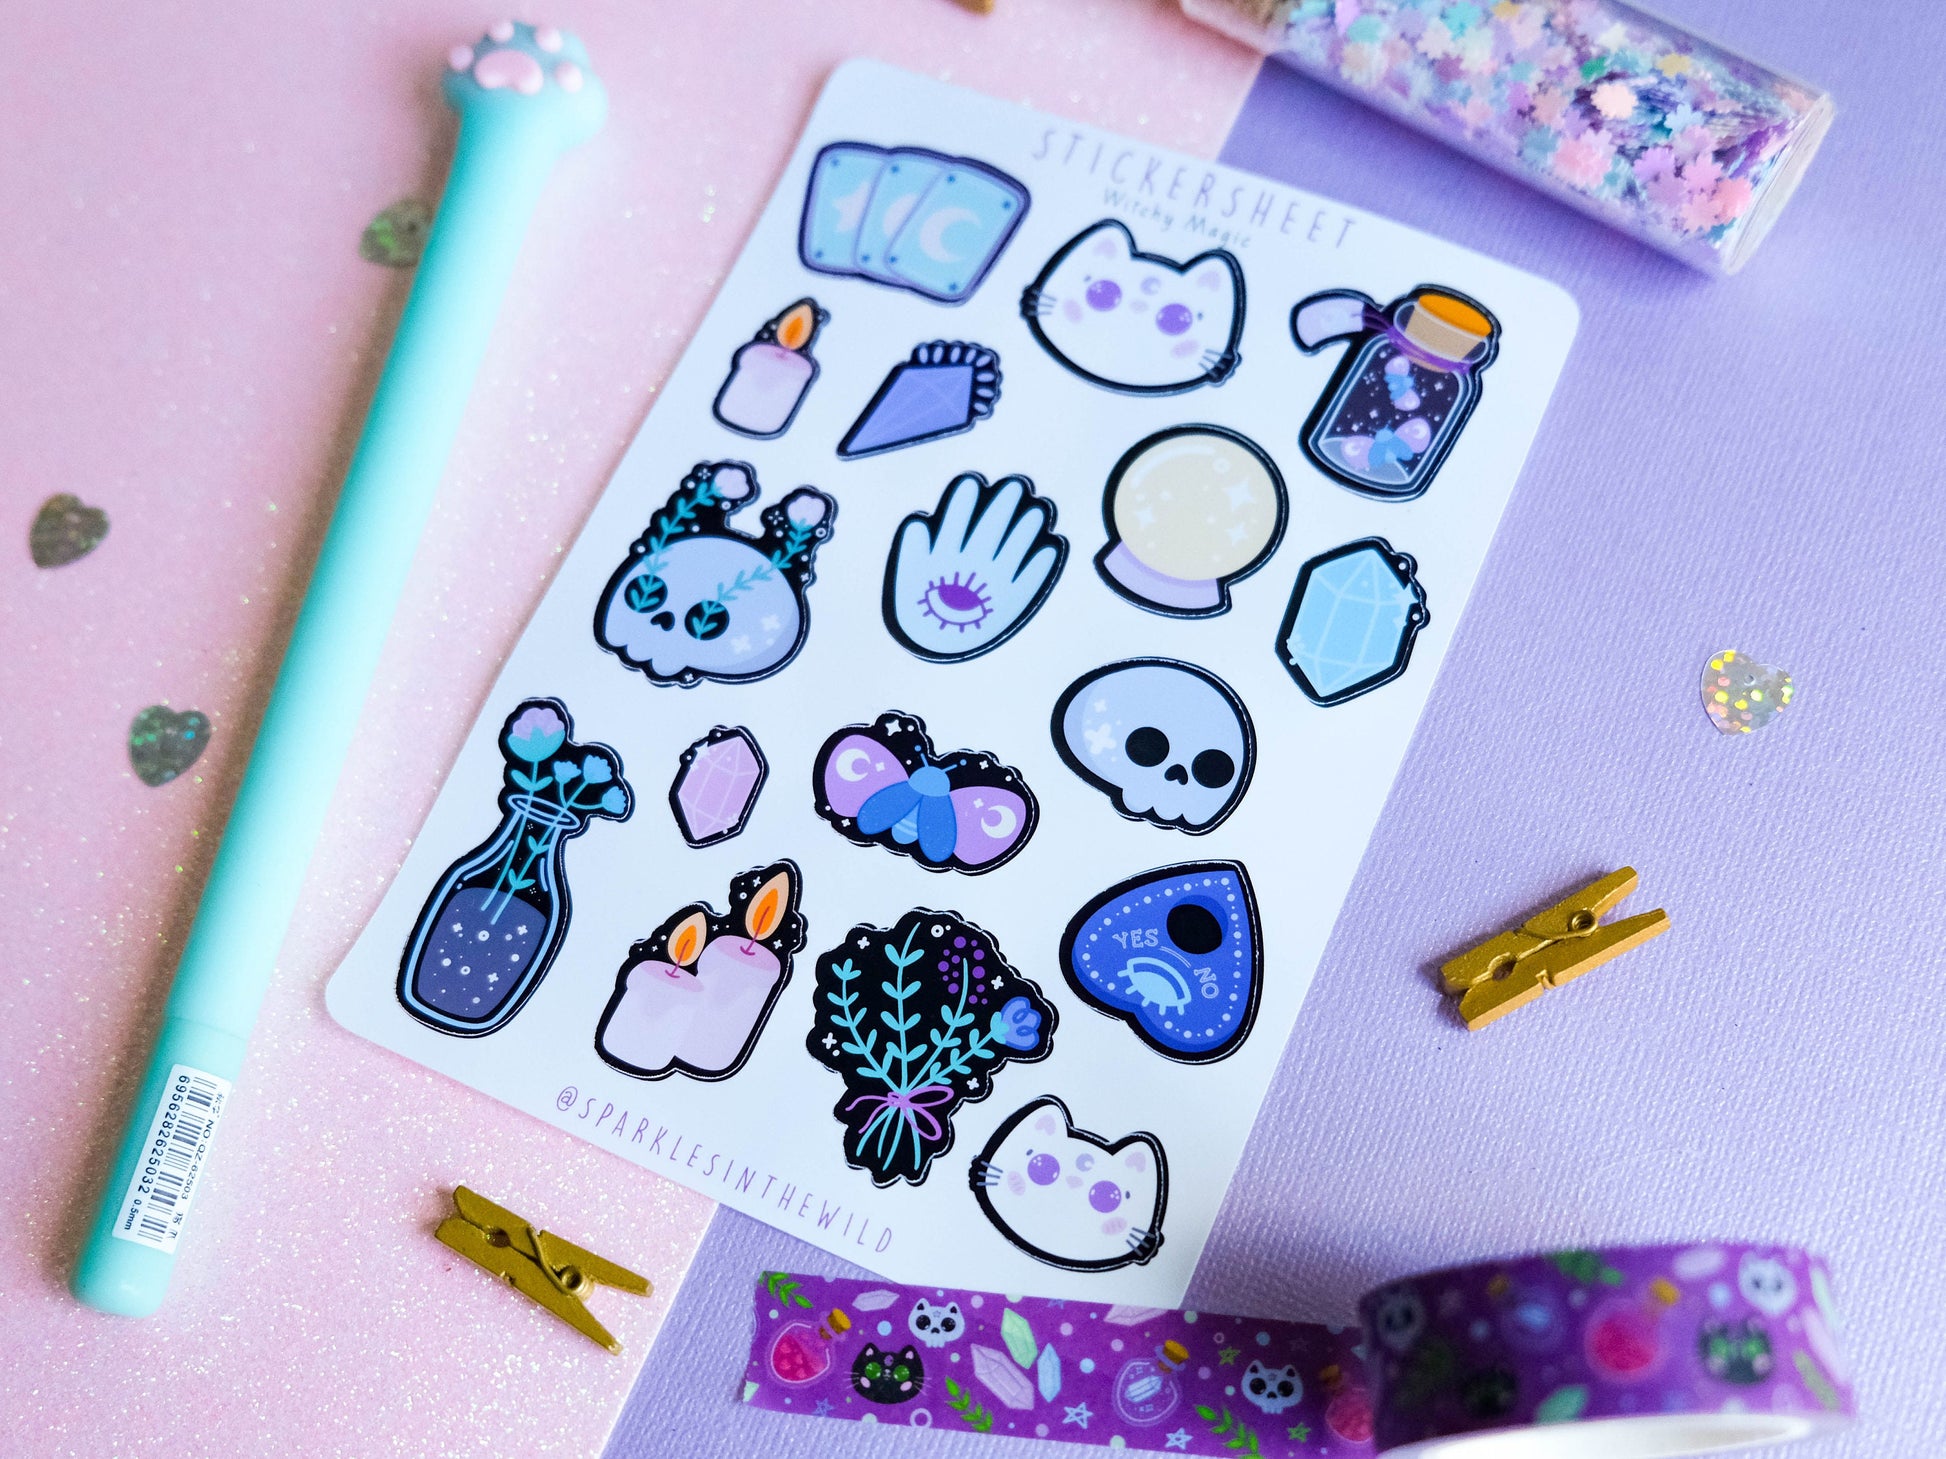 Stickersheet water resistant Witchcraft and Magical stickers perfect to decorate bujo and planners